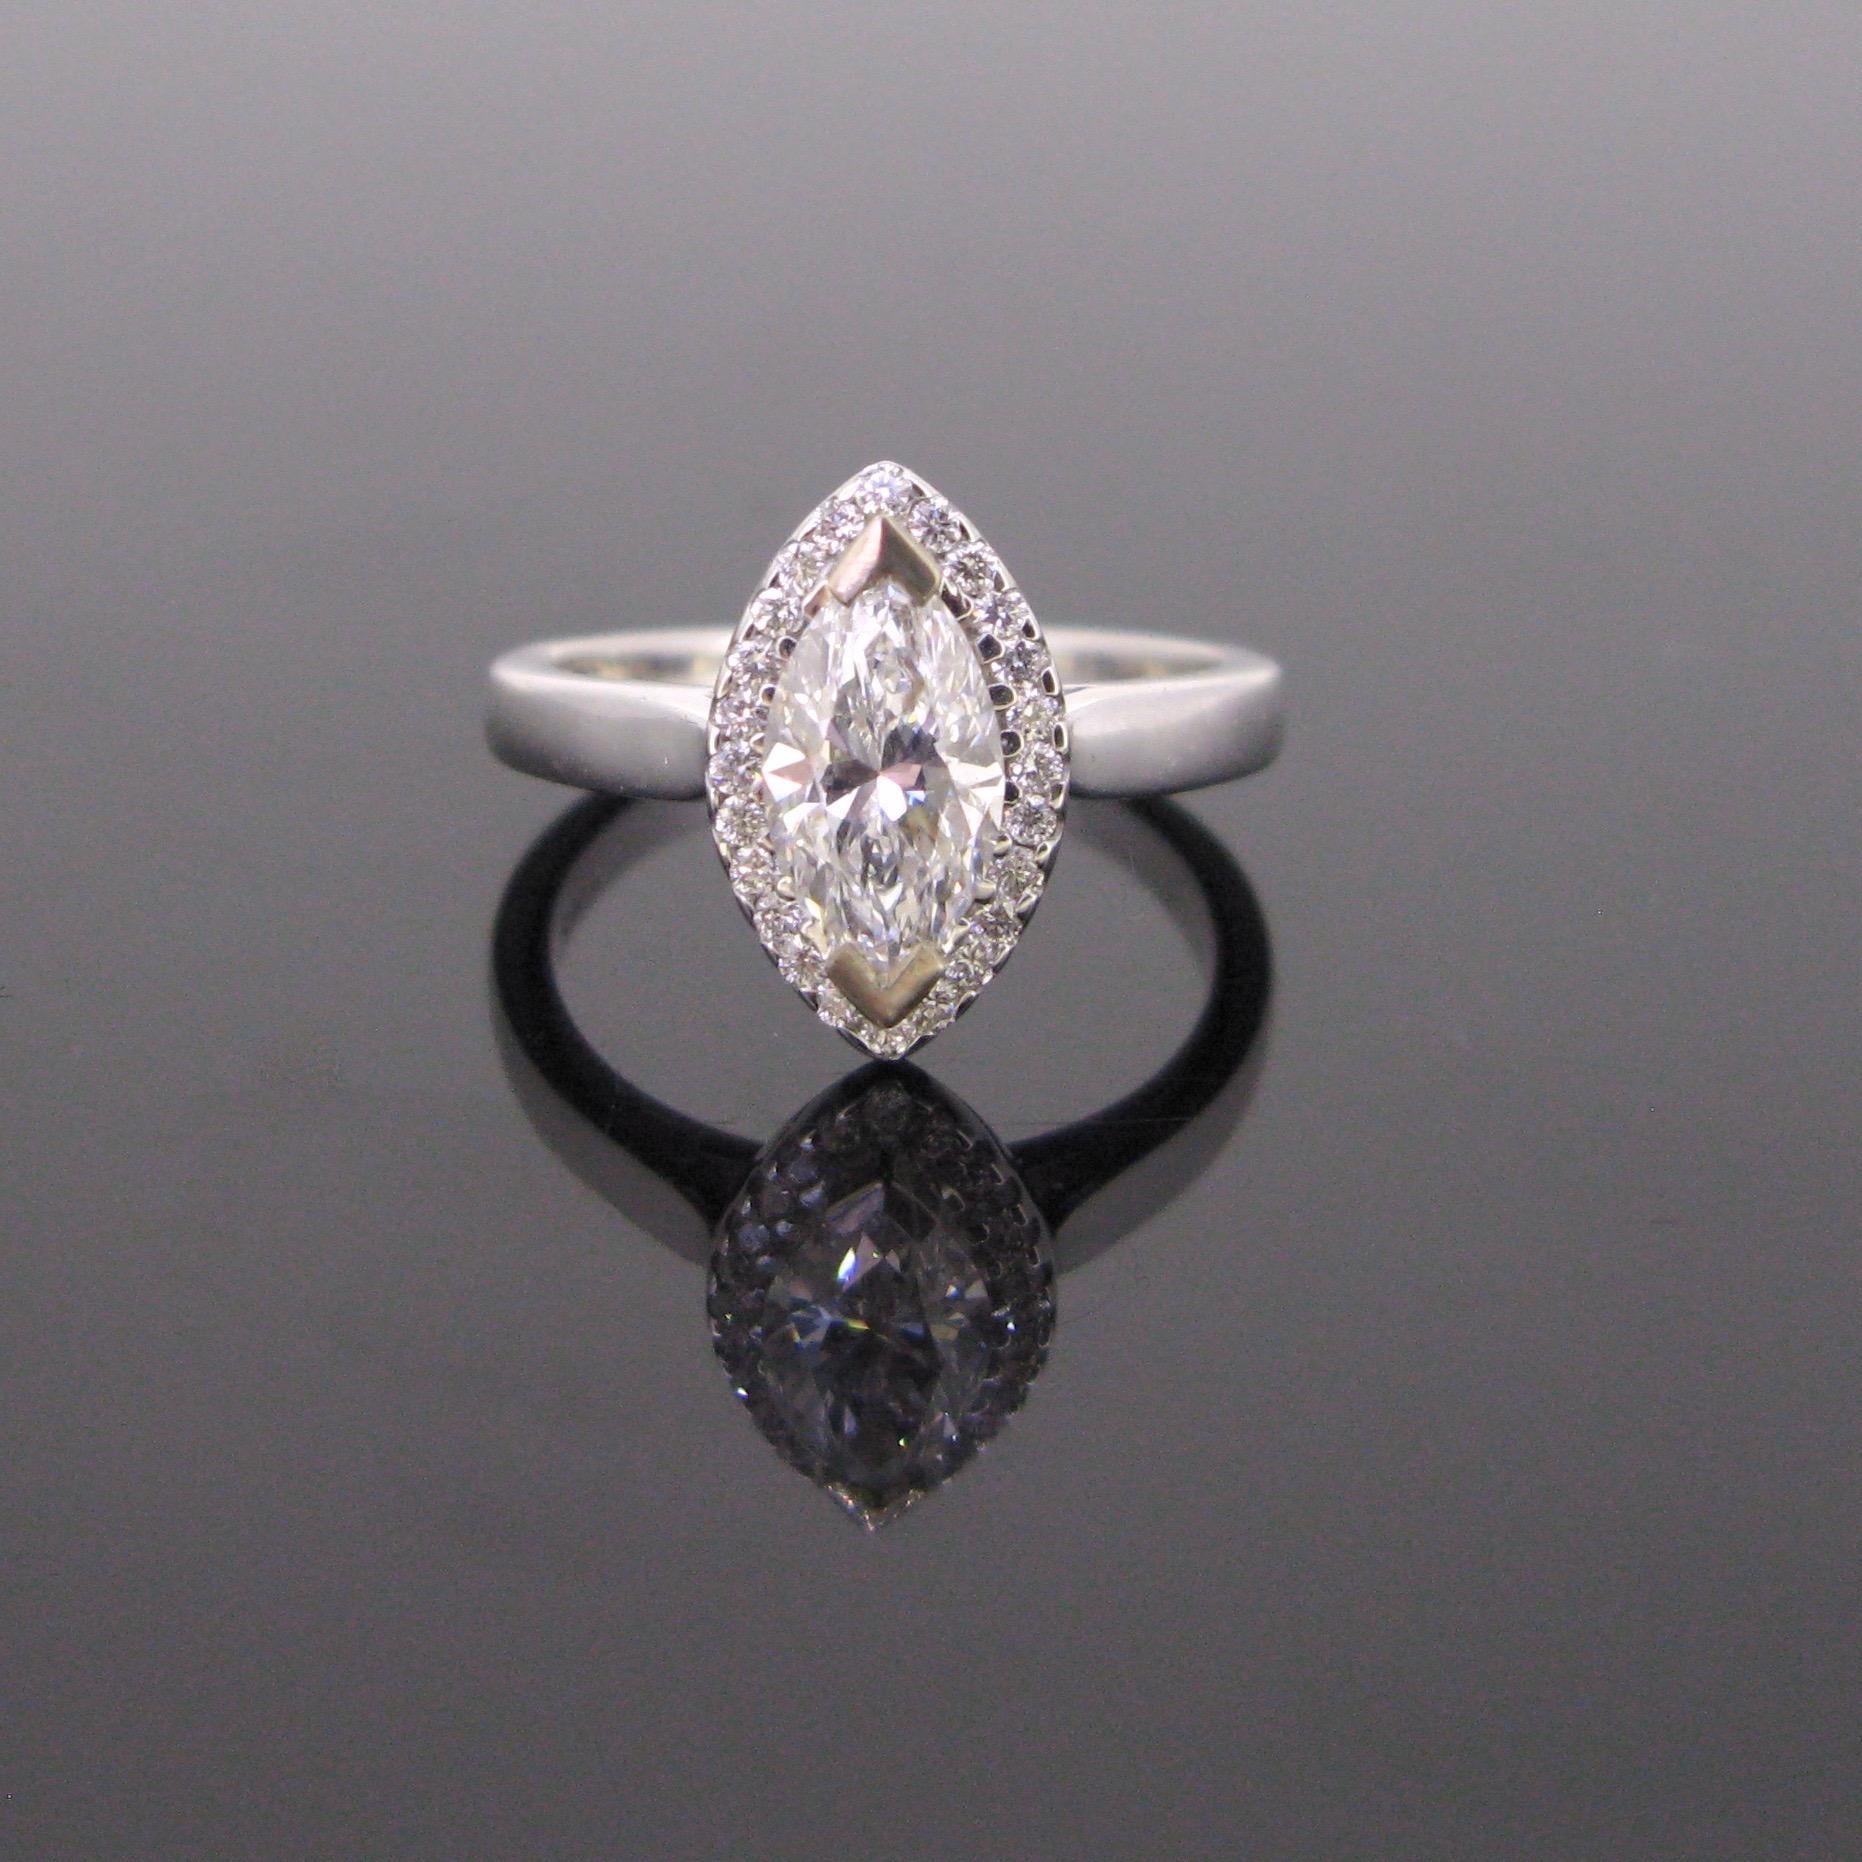 This Solitaire ring is set with a marquise cut diamond weighing 1.01 ct with color E and a VVS1 clarity. It comes with a laboratory certificate nº5774-178 from GCS (London, UK). The diamond is surrounded with 24 brilliant cut diamonds for an